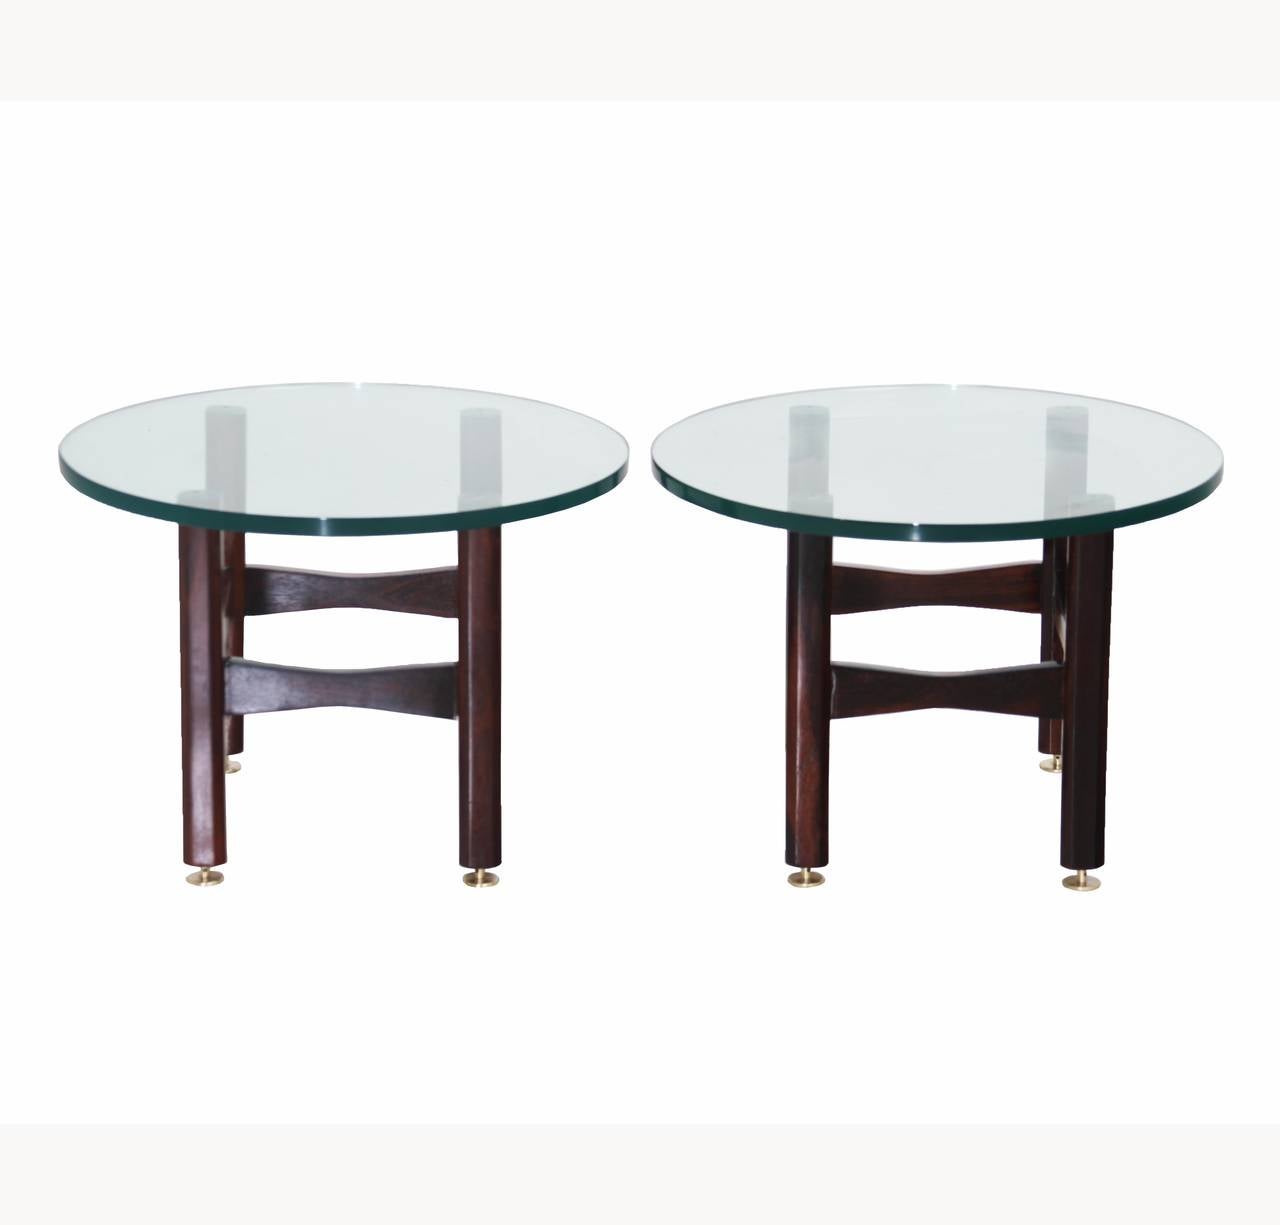 A pair of matching solid Brazilian Rosewood side tables with brushed brass feet and round clear glass tops.

Many pieces are stored in our warehouse, so please click on contact dealer under our logo below to find out if the pieces you are